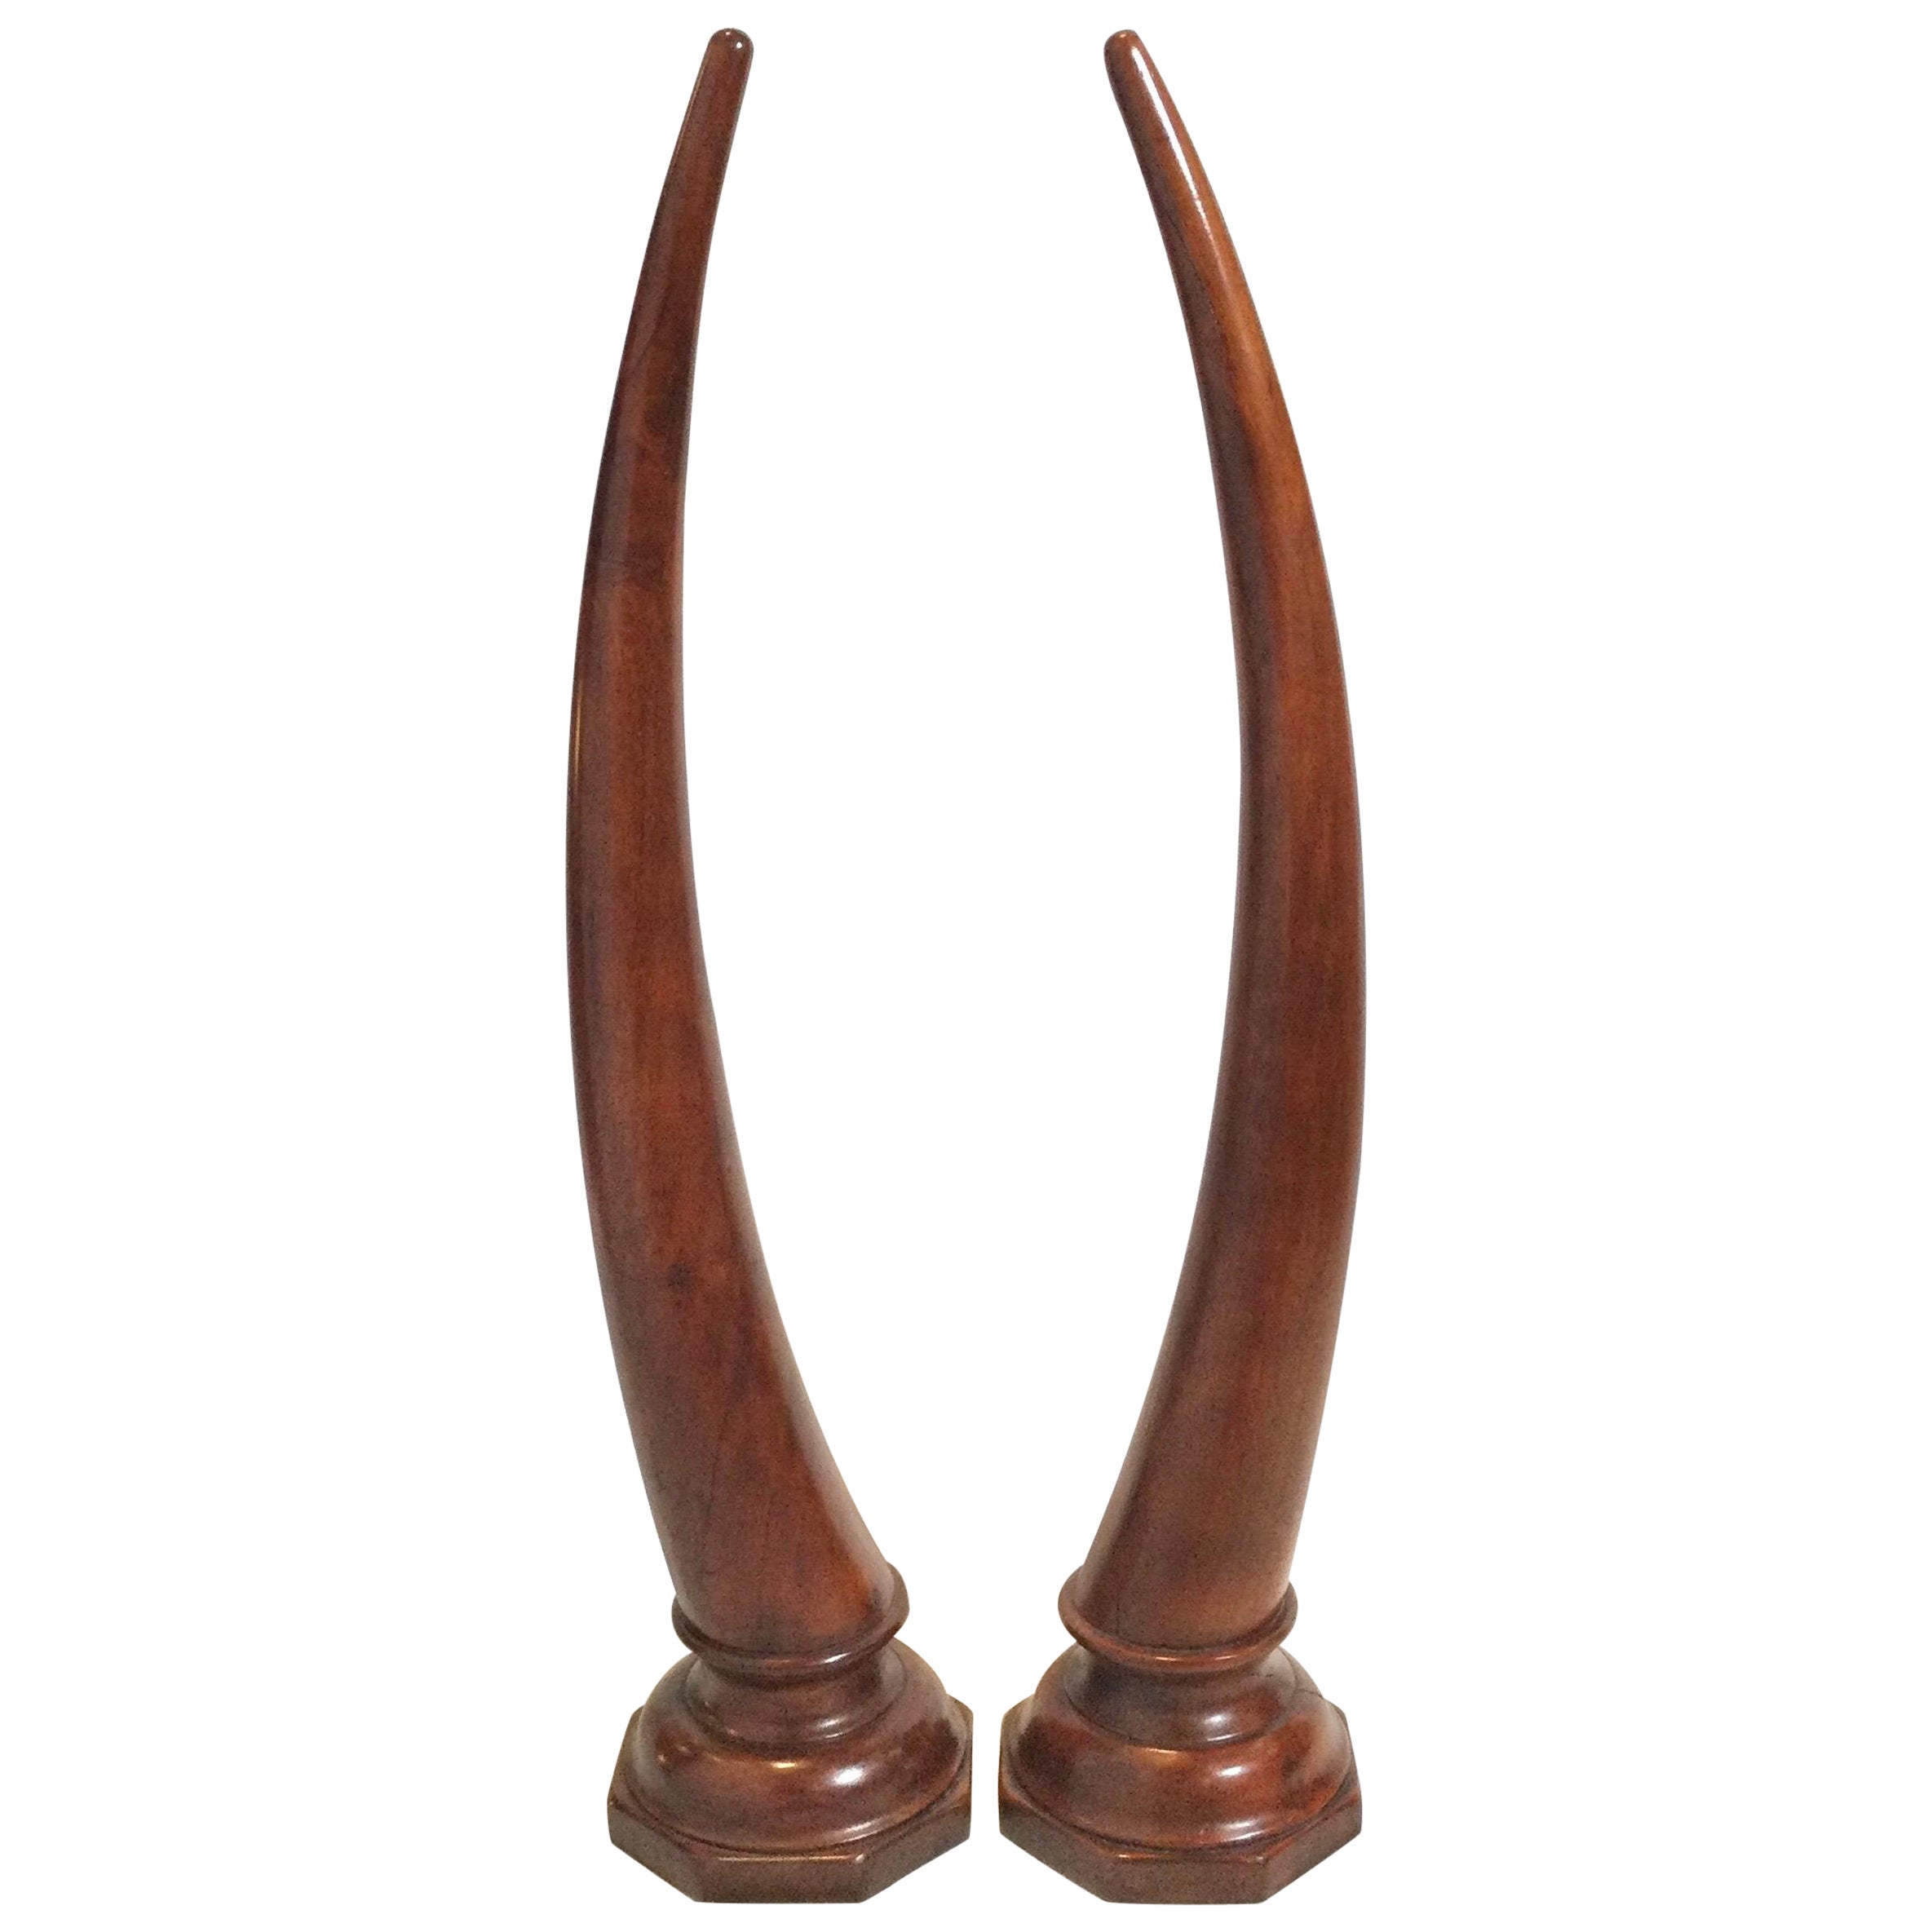 Pair of Large Carved Mahogany Tusks